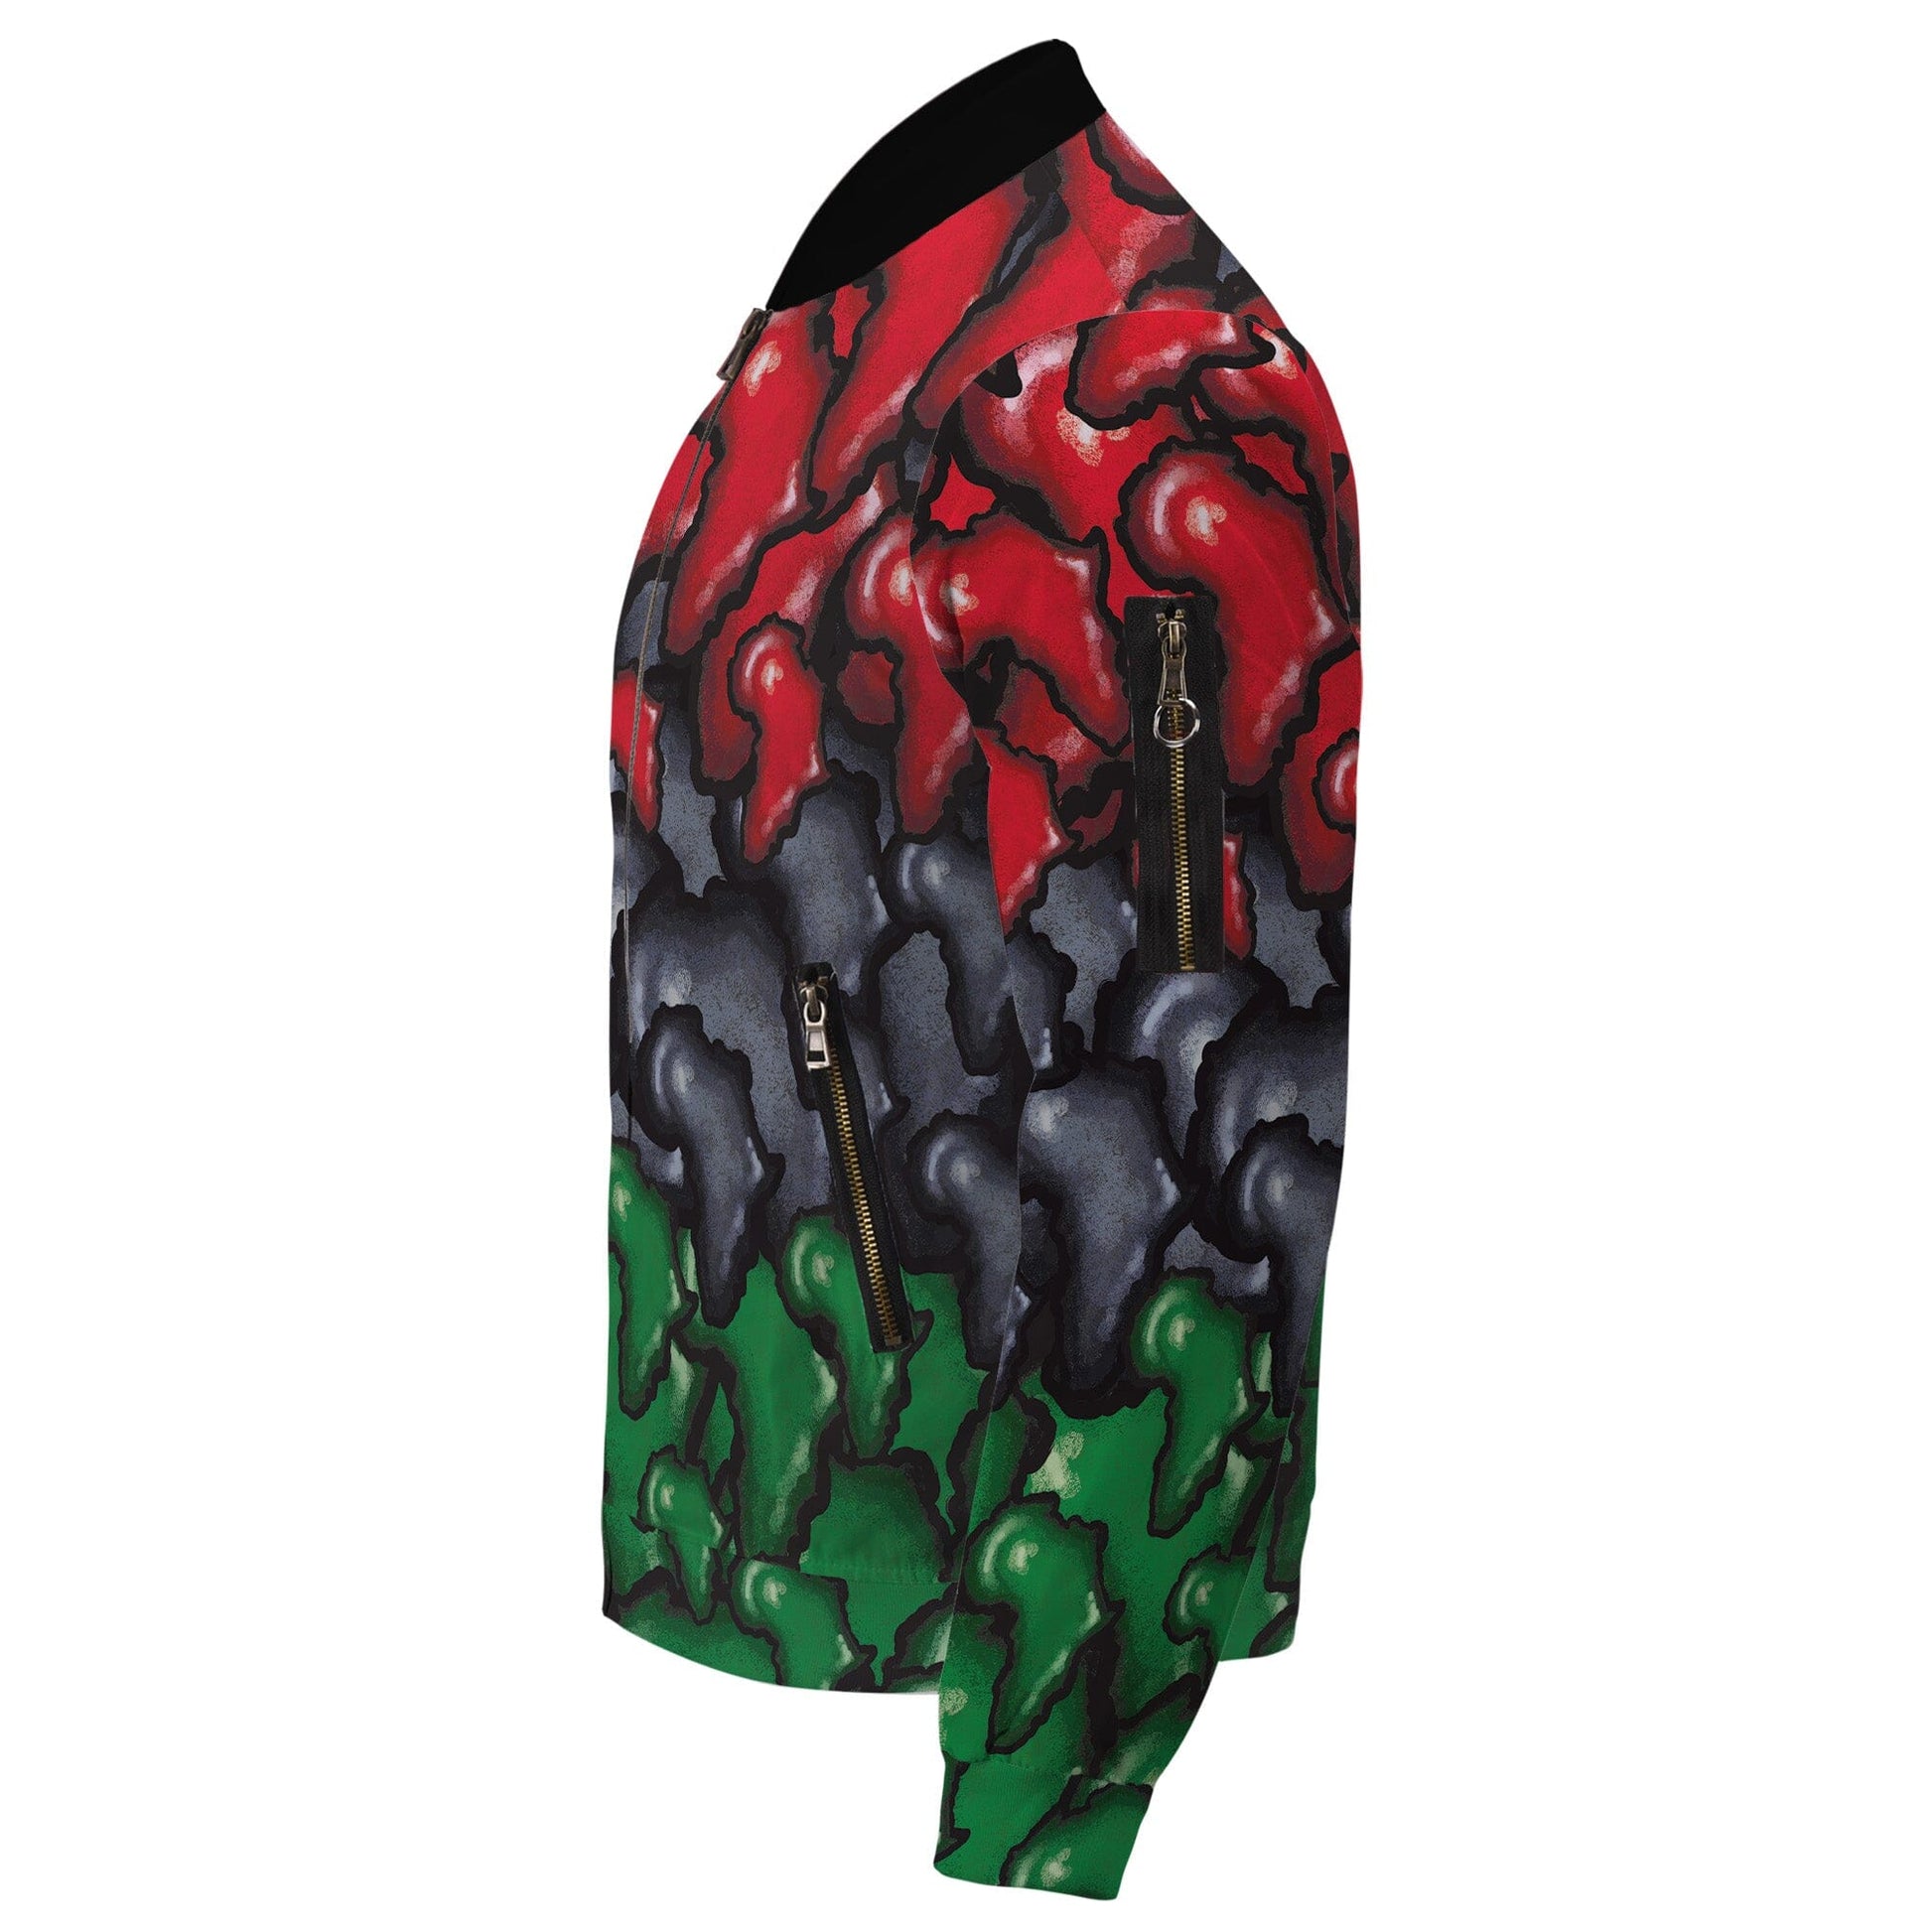 Africa-Shaped In Pan-African Colors Bomber Jacket Bomber Jacket Tianci 